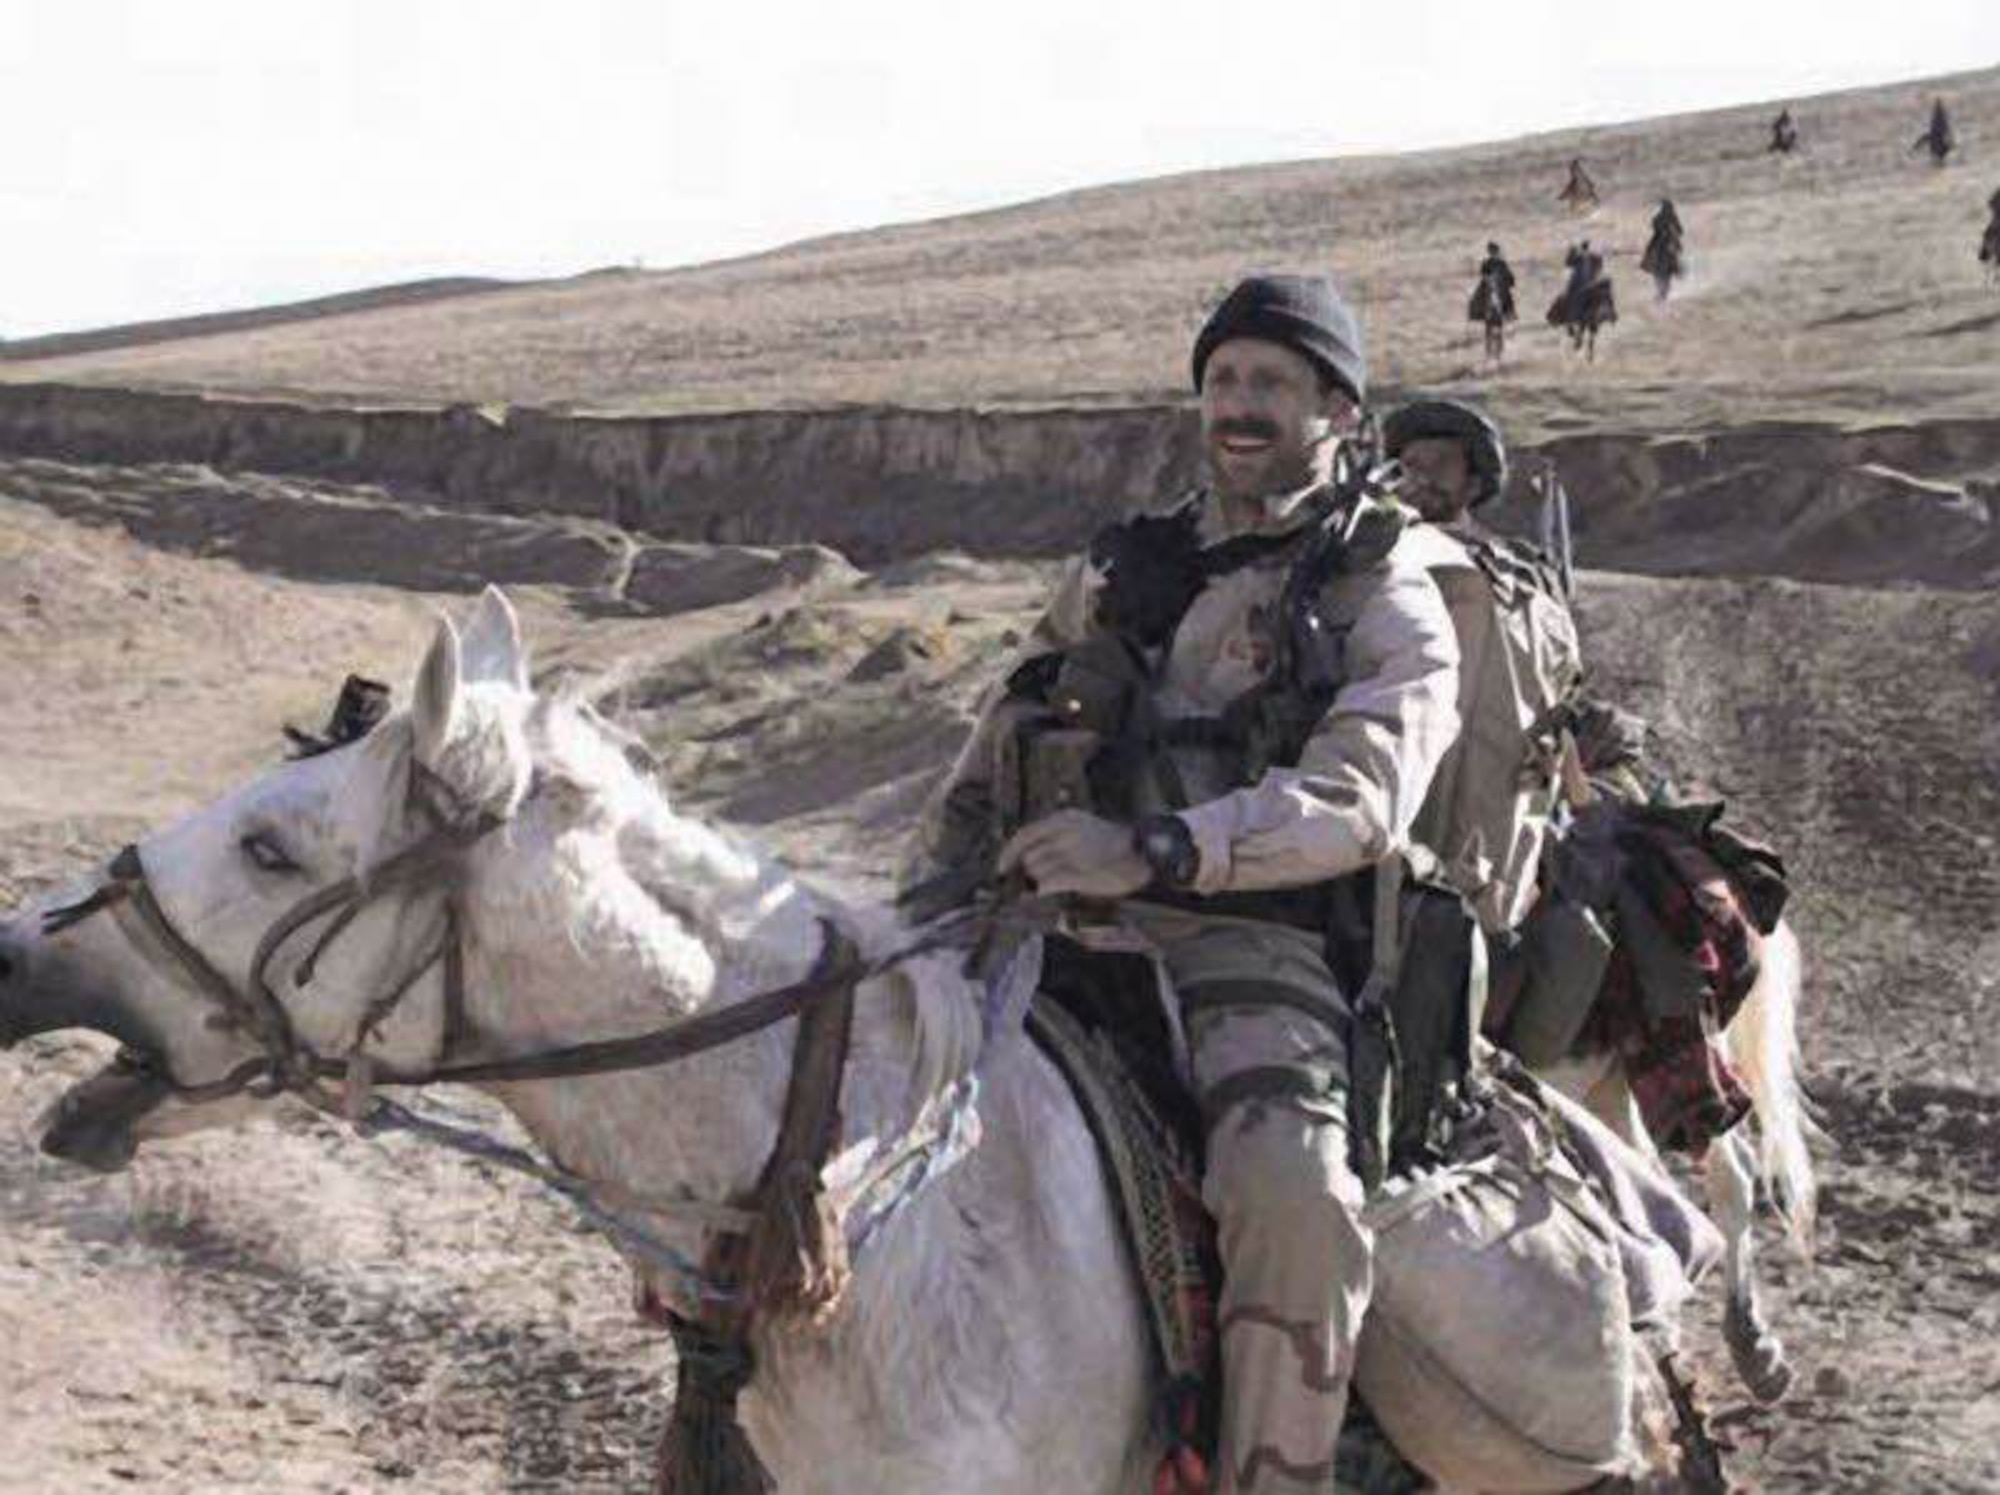 Master Sgt. Bart Decker and other Airmen used unconventional methods of transportation during Afghanistan operations.  Riding horses along with Northern Alliance forces provided an interface between ground forces and air power. (Courtesy photo)